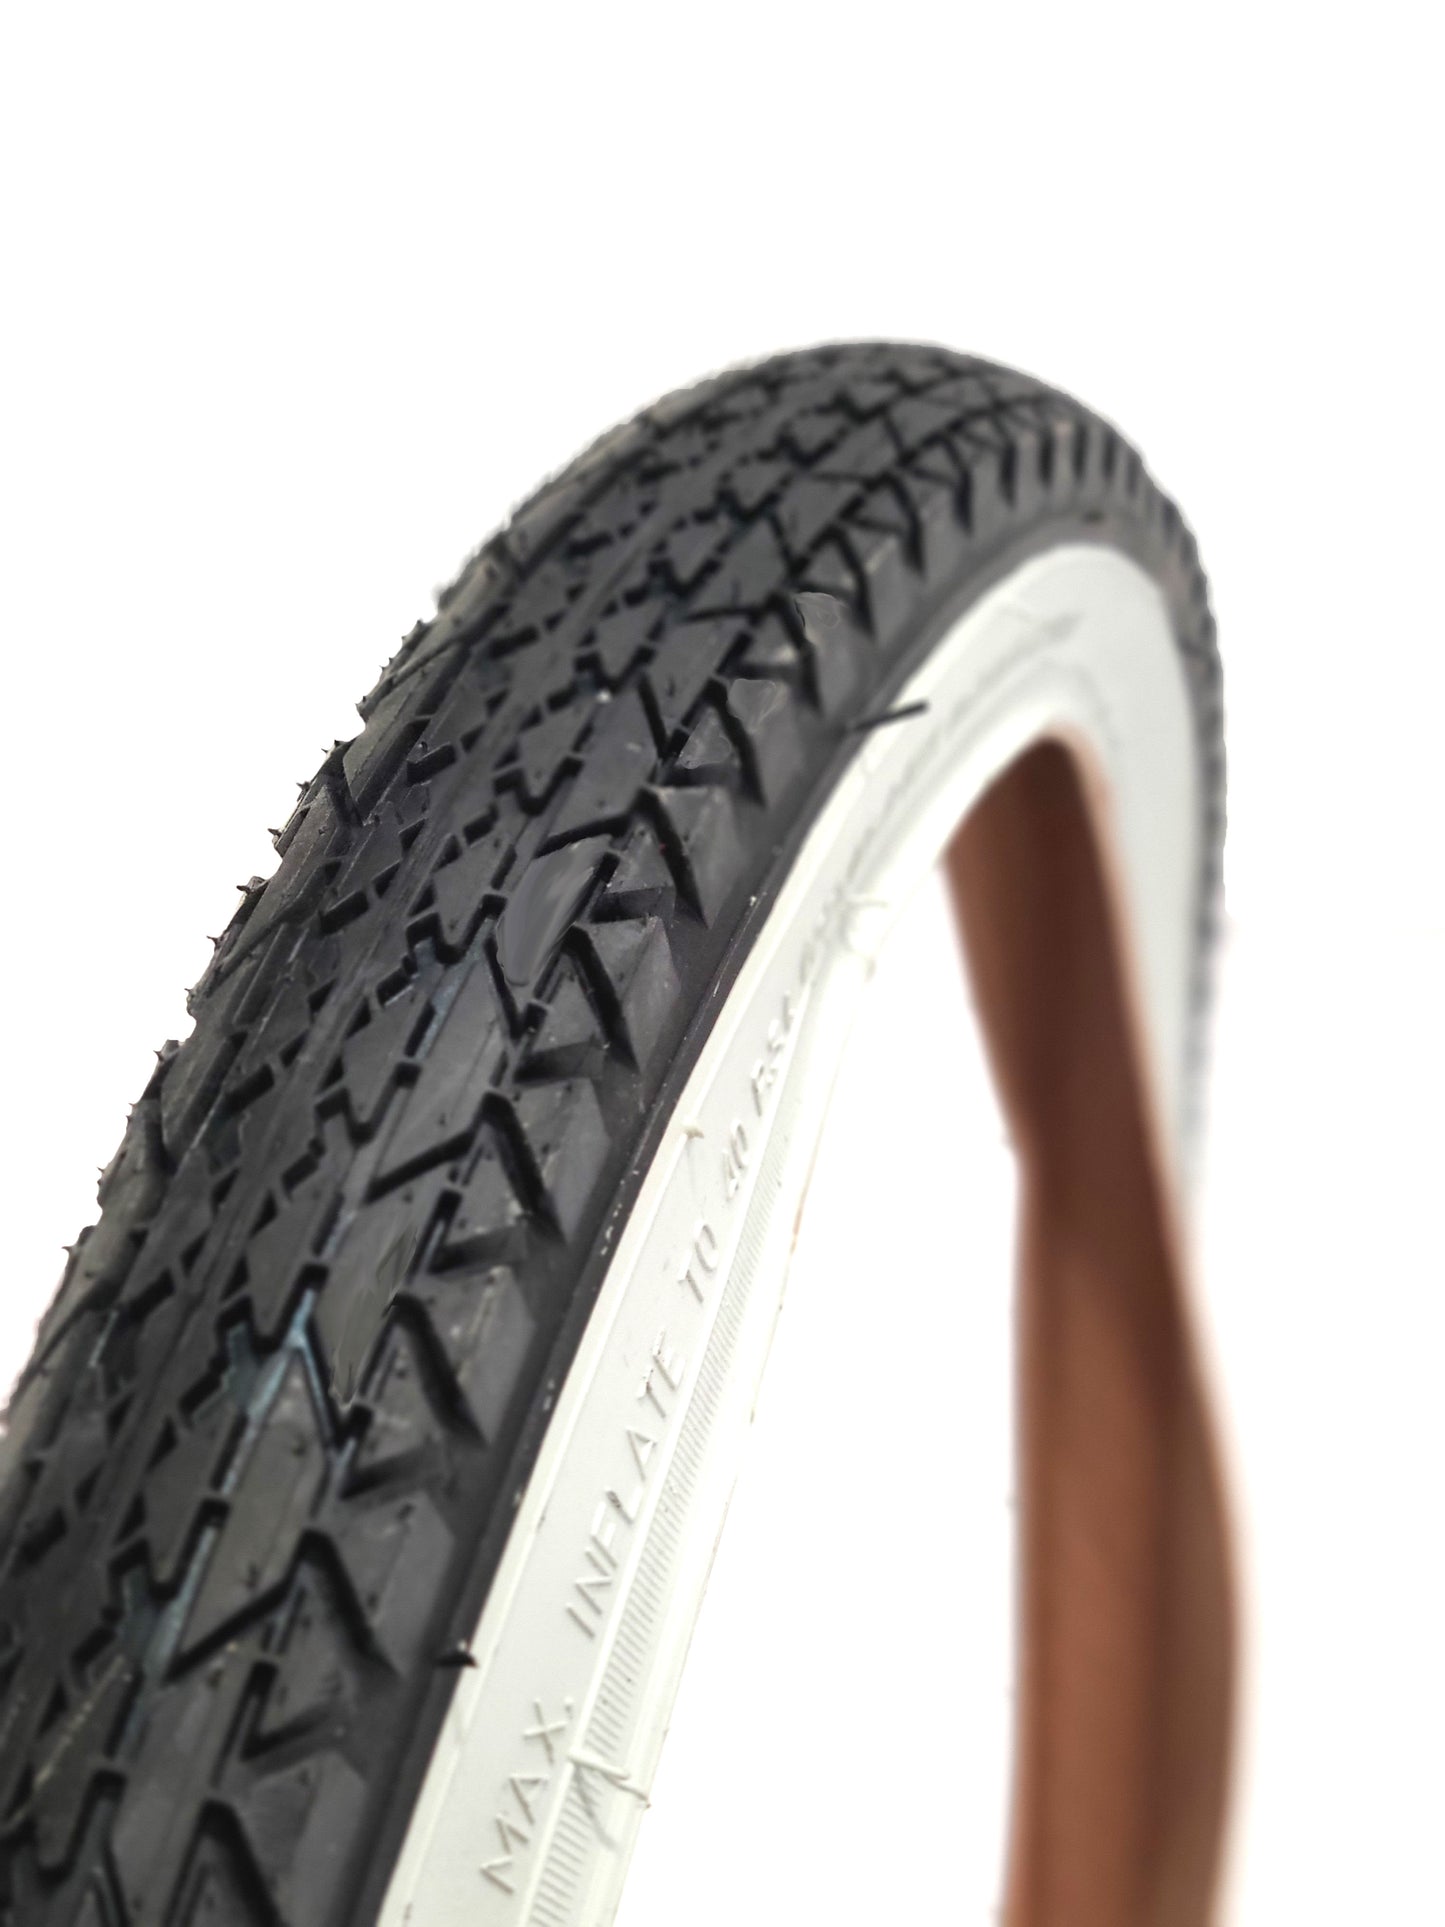 26" Comfort Tire, Black with White Sidewall